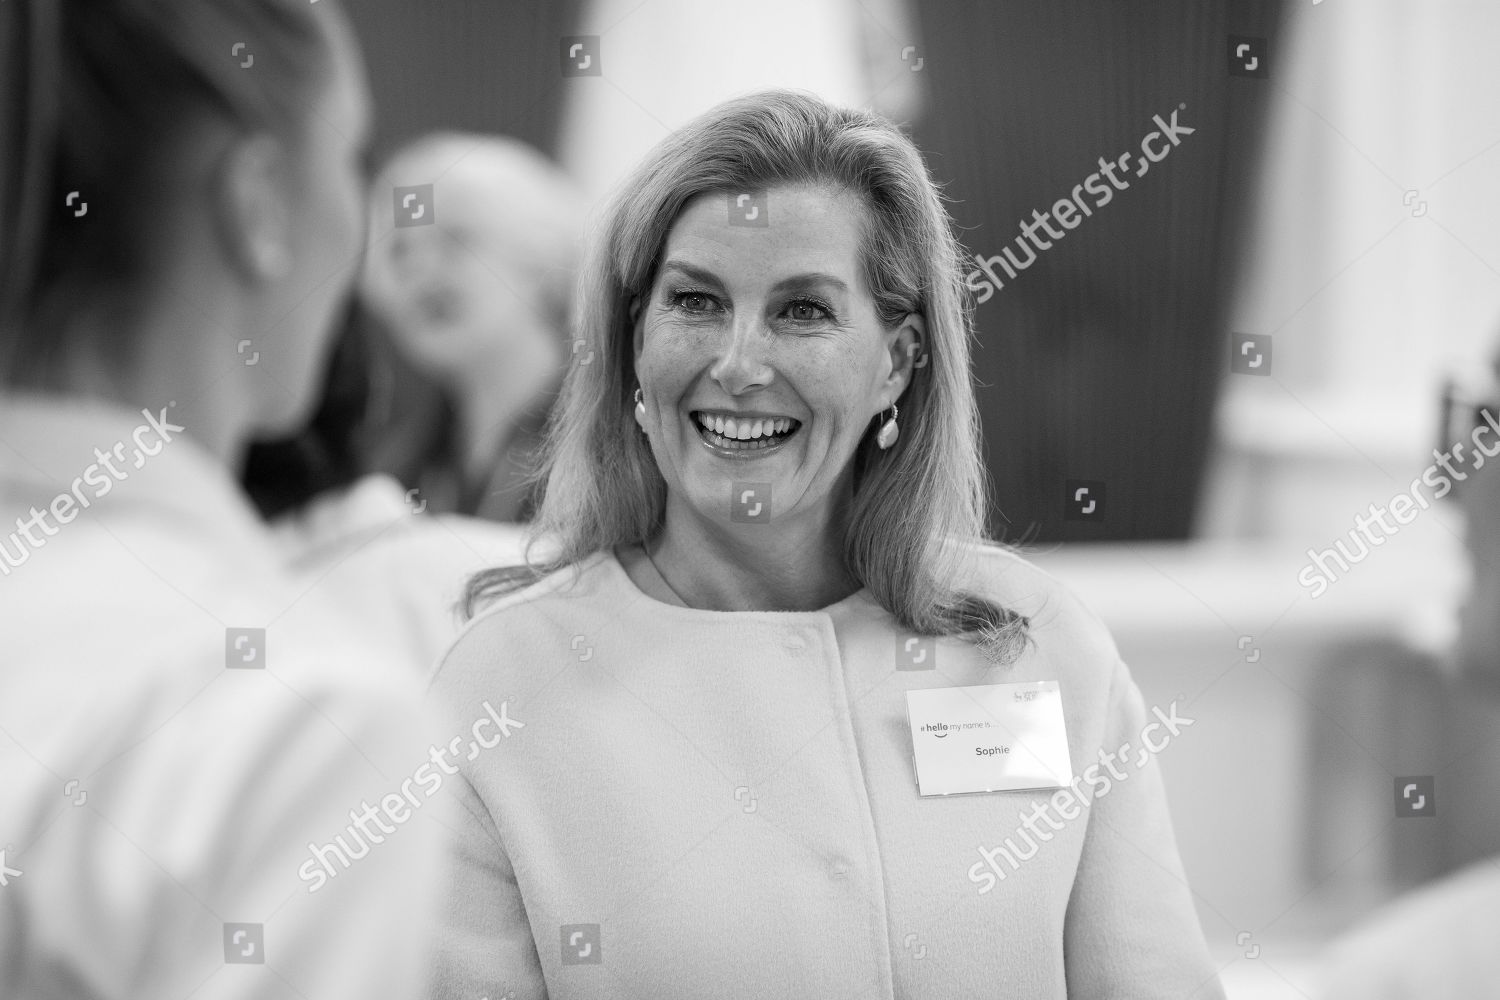 sophie-countess-of-wessex-opens-new-health-sciences-institute-university-of-surrey-guildford-uk-shutterstock-editorial-10542421as.jpg